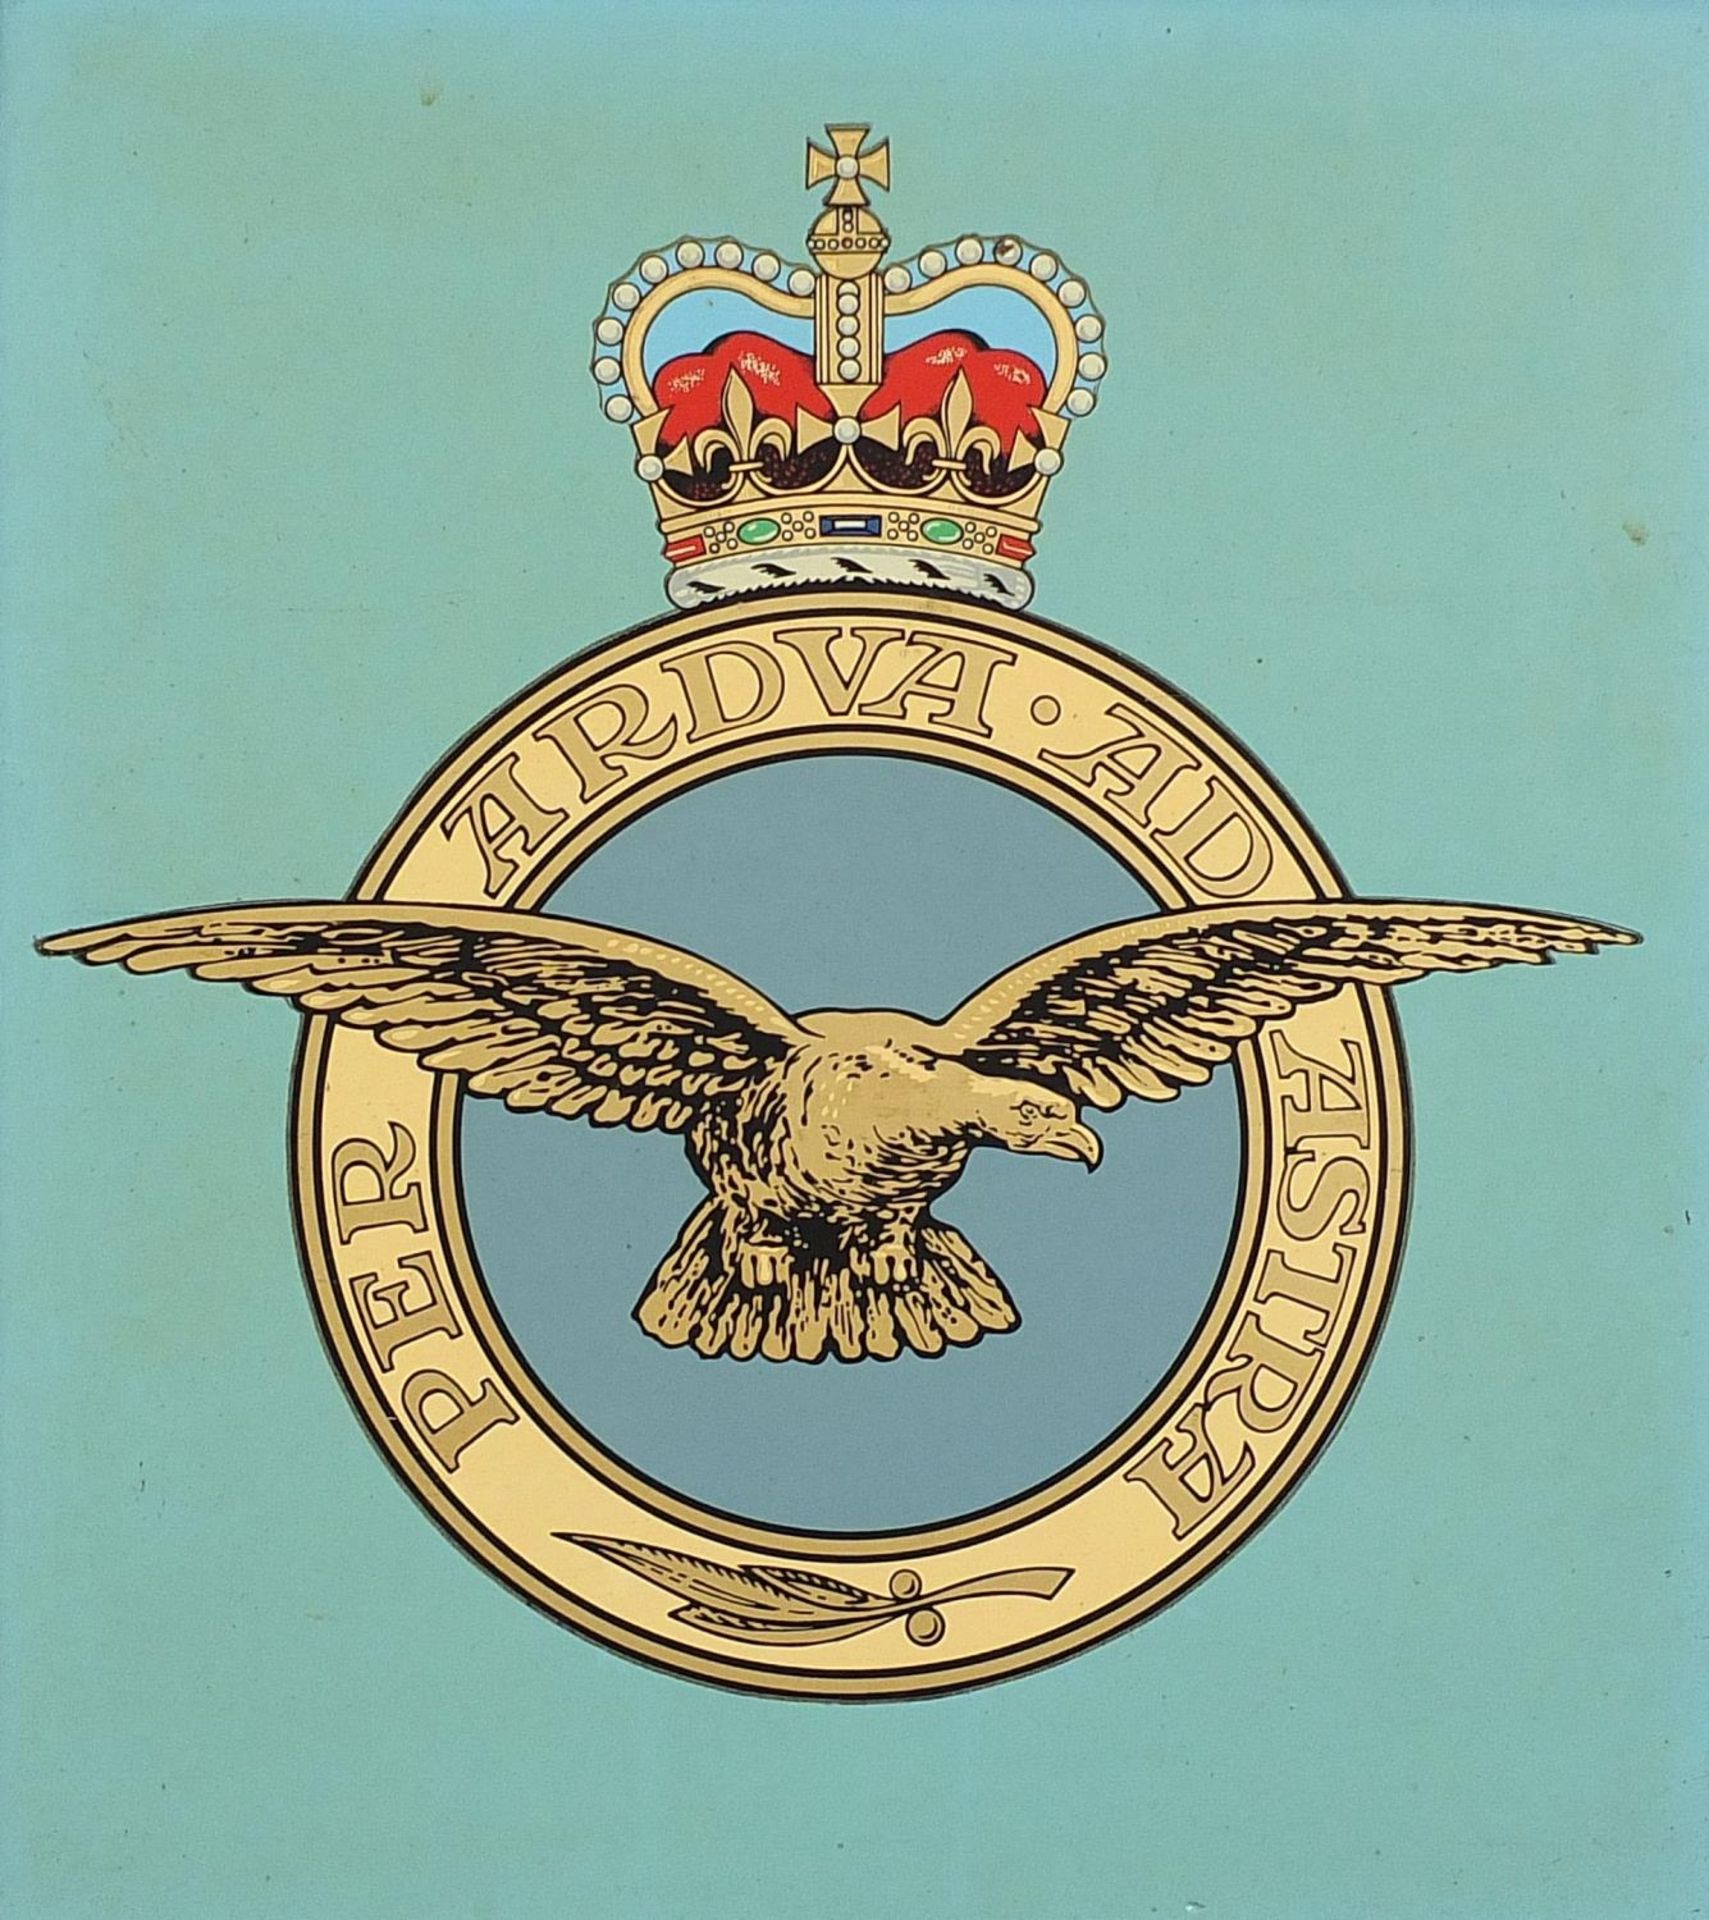 Military interest hand painted RAF panel, framed, 35cm x 31cm excluding the frame